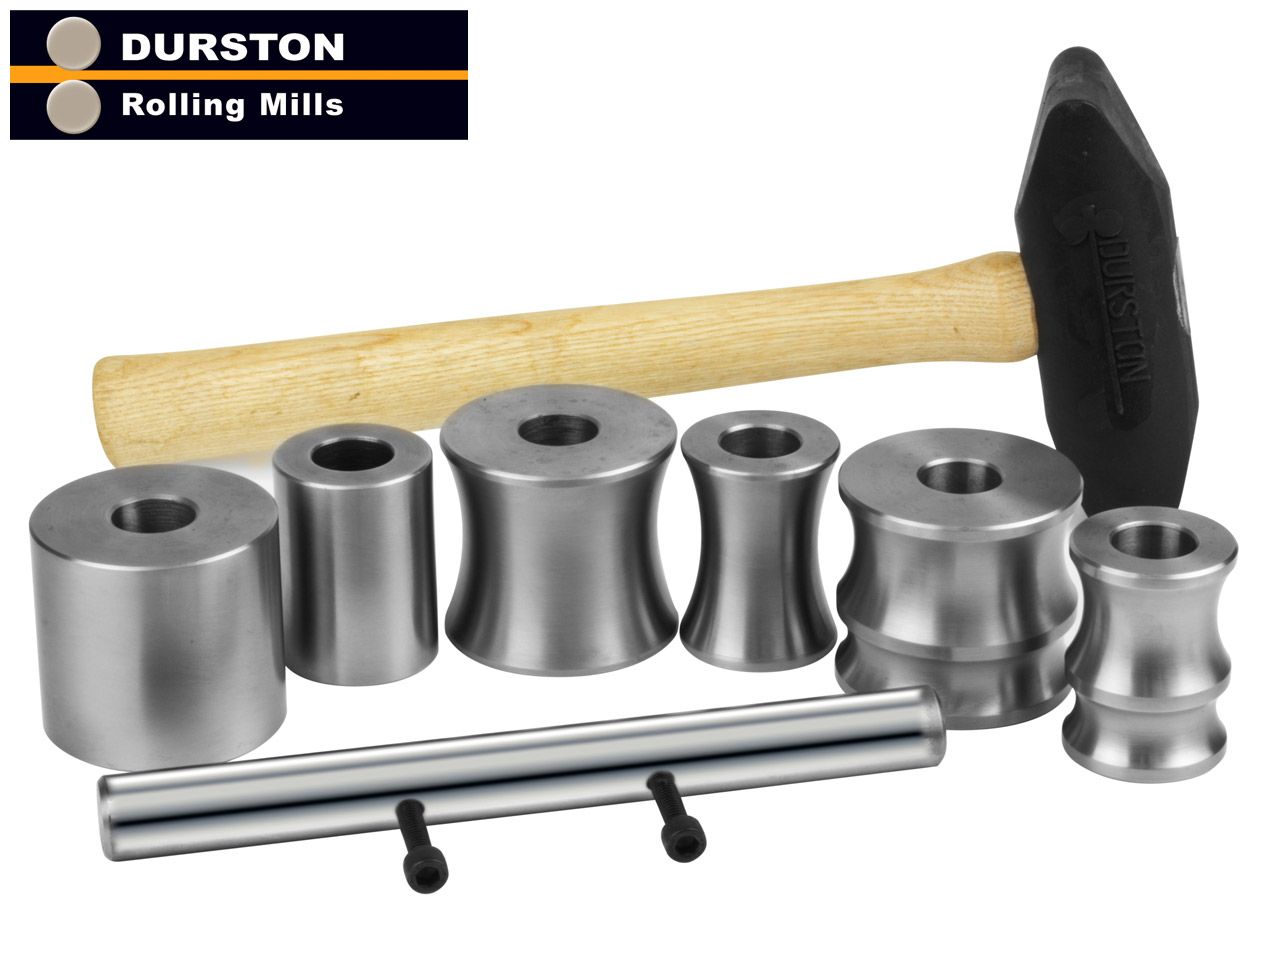 MD1309 = Complete Jump Ring Forming Set by Durston - FDJ Tool